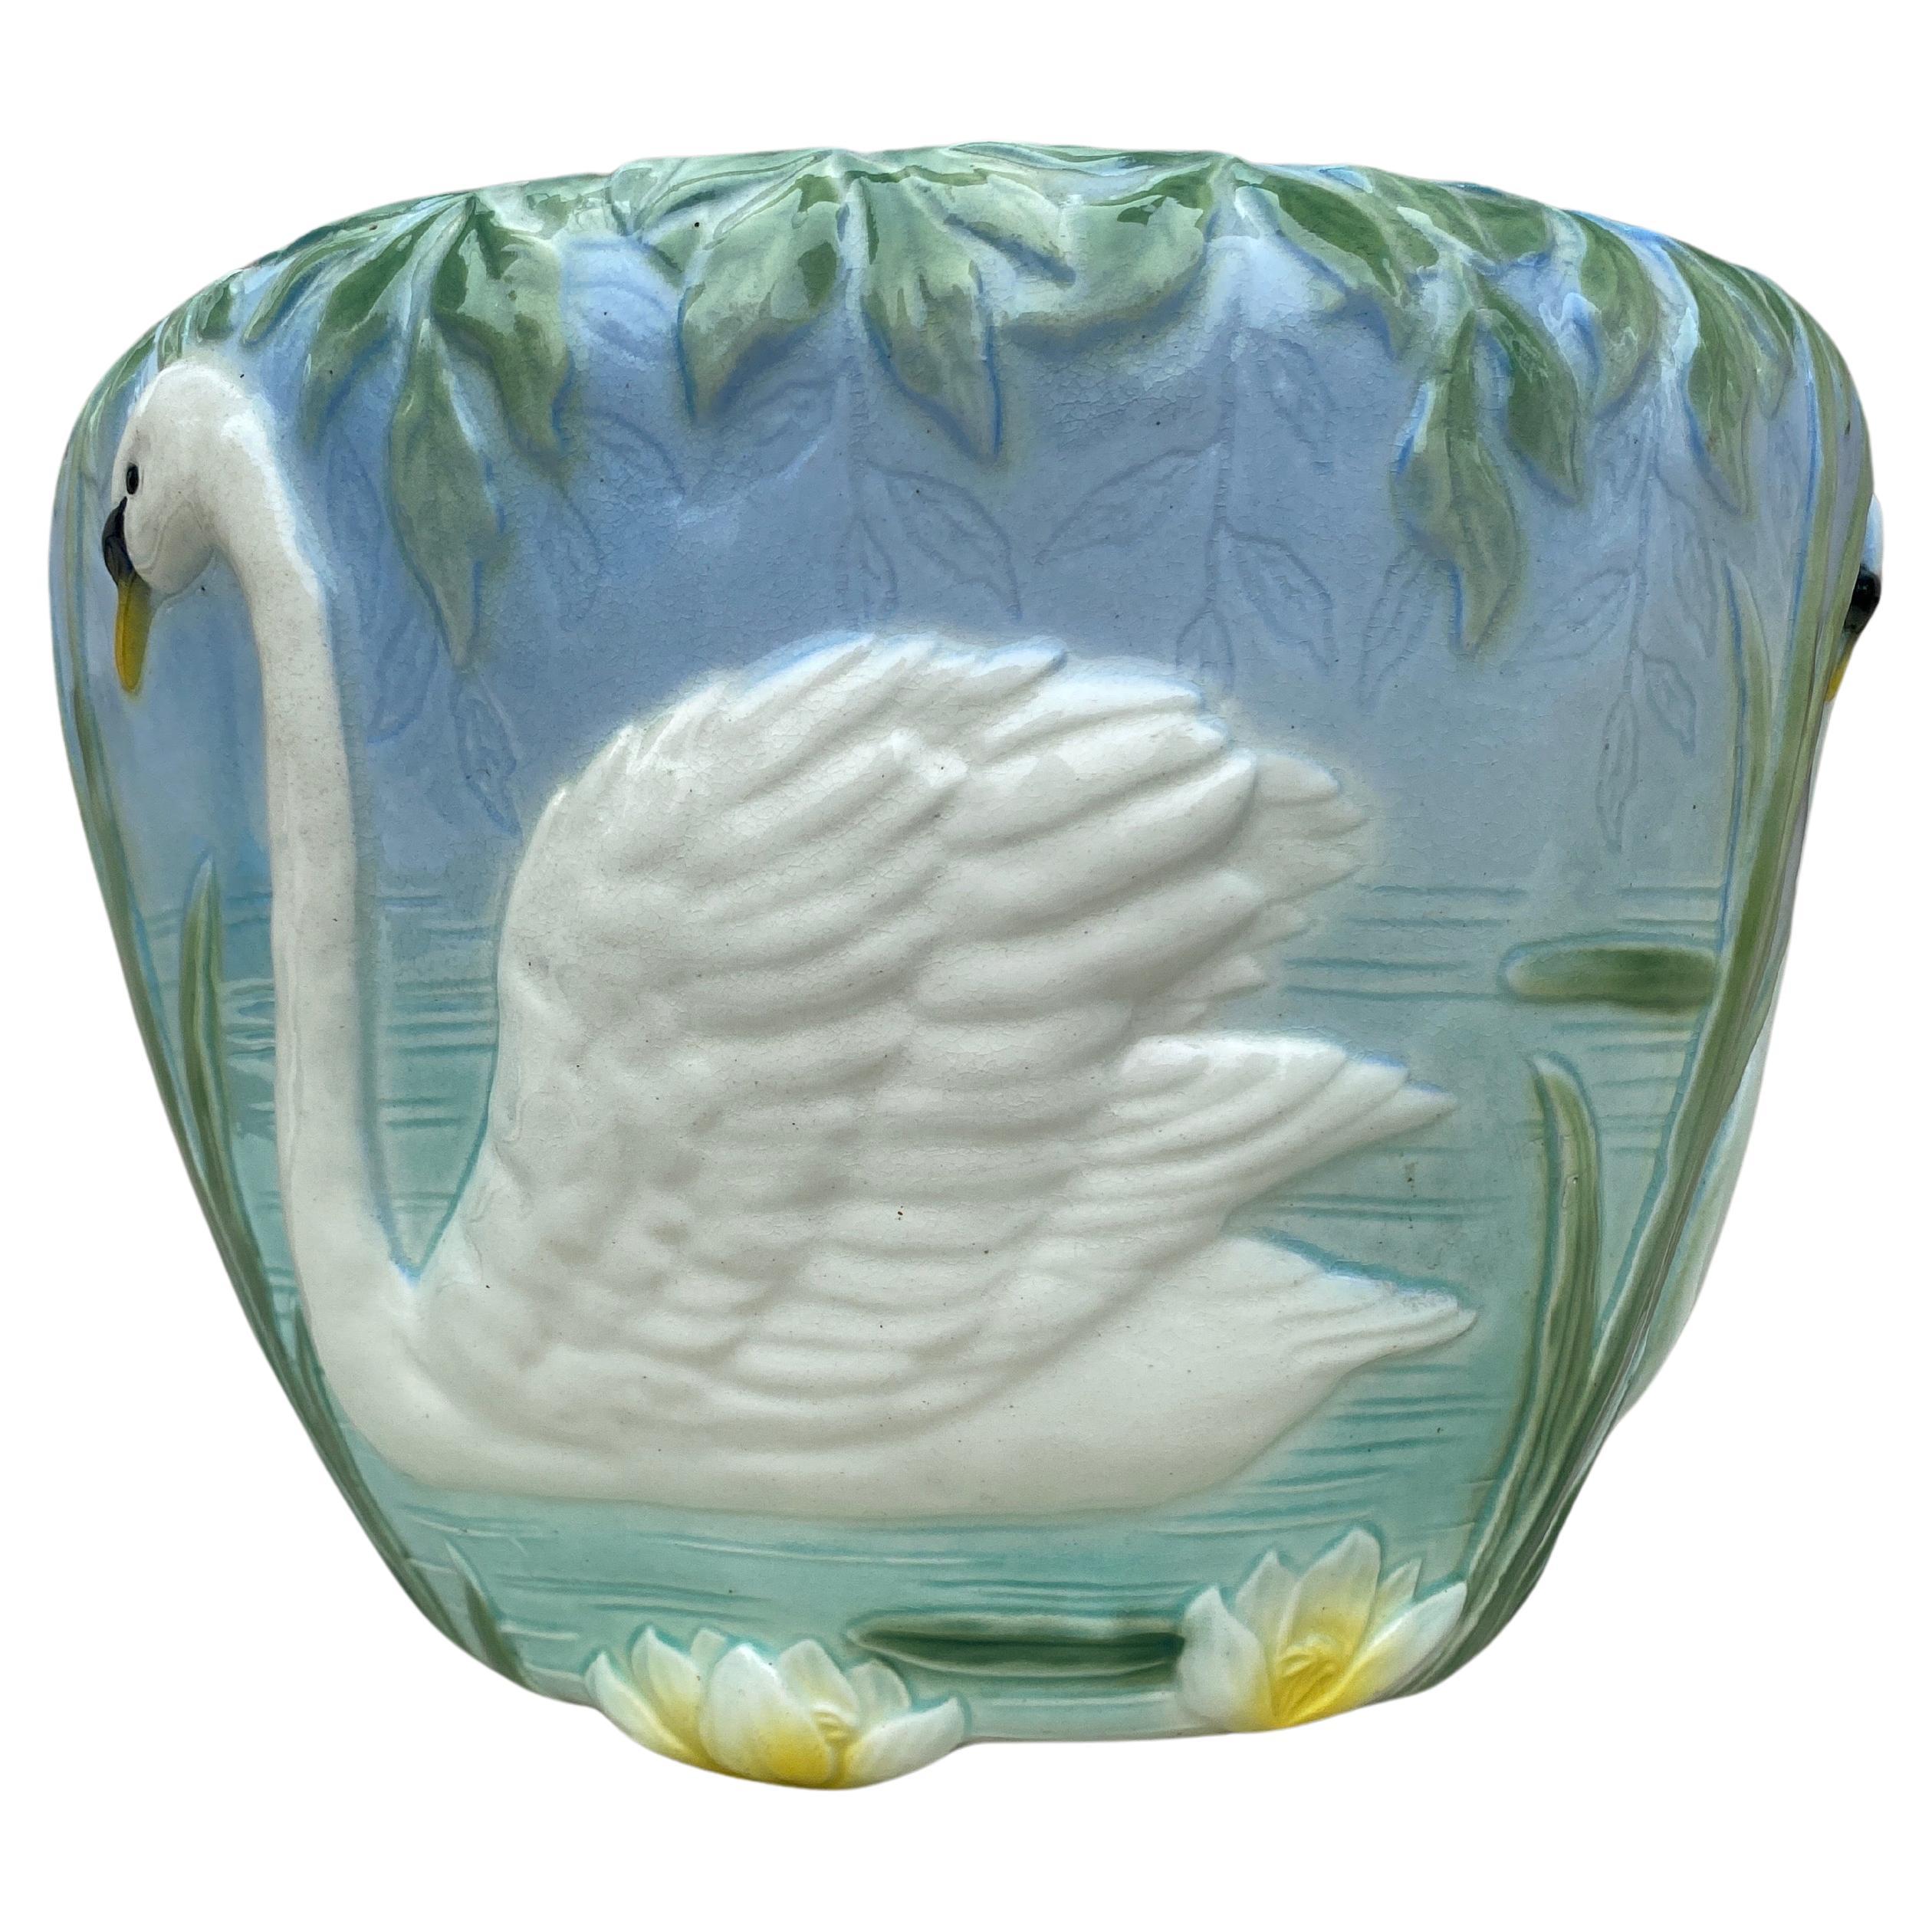 Antique large Majolica planter cache pot with swan on two sides with lily pads and aquatics plants circa 1900 signed Keller and Guerin Saint Clement.
Reference / Page 57 